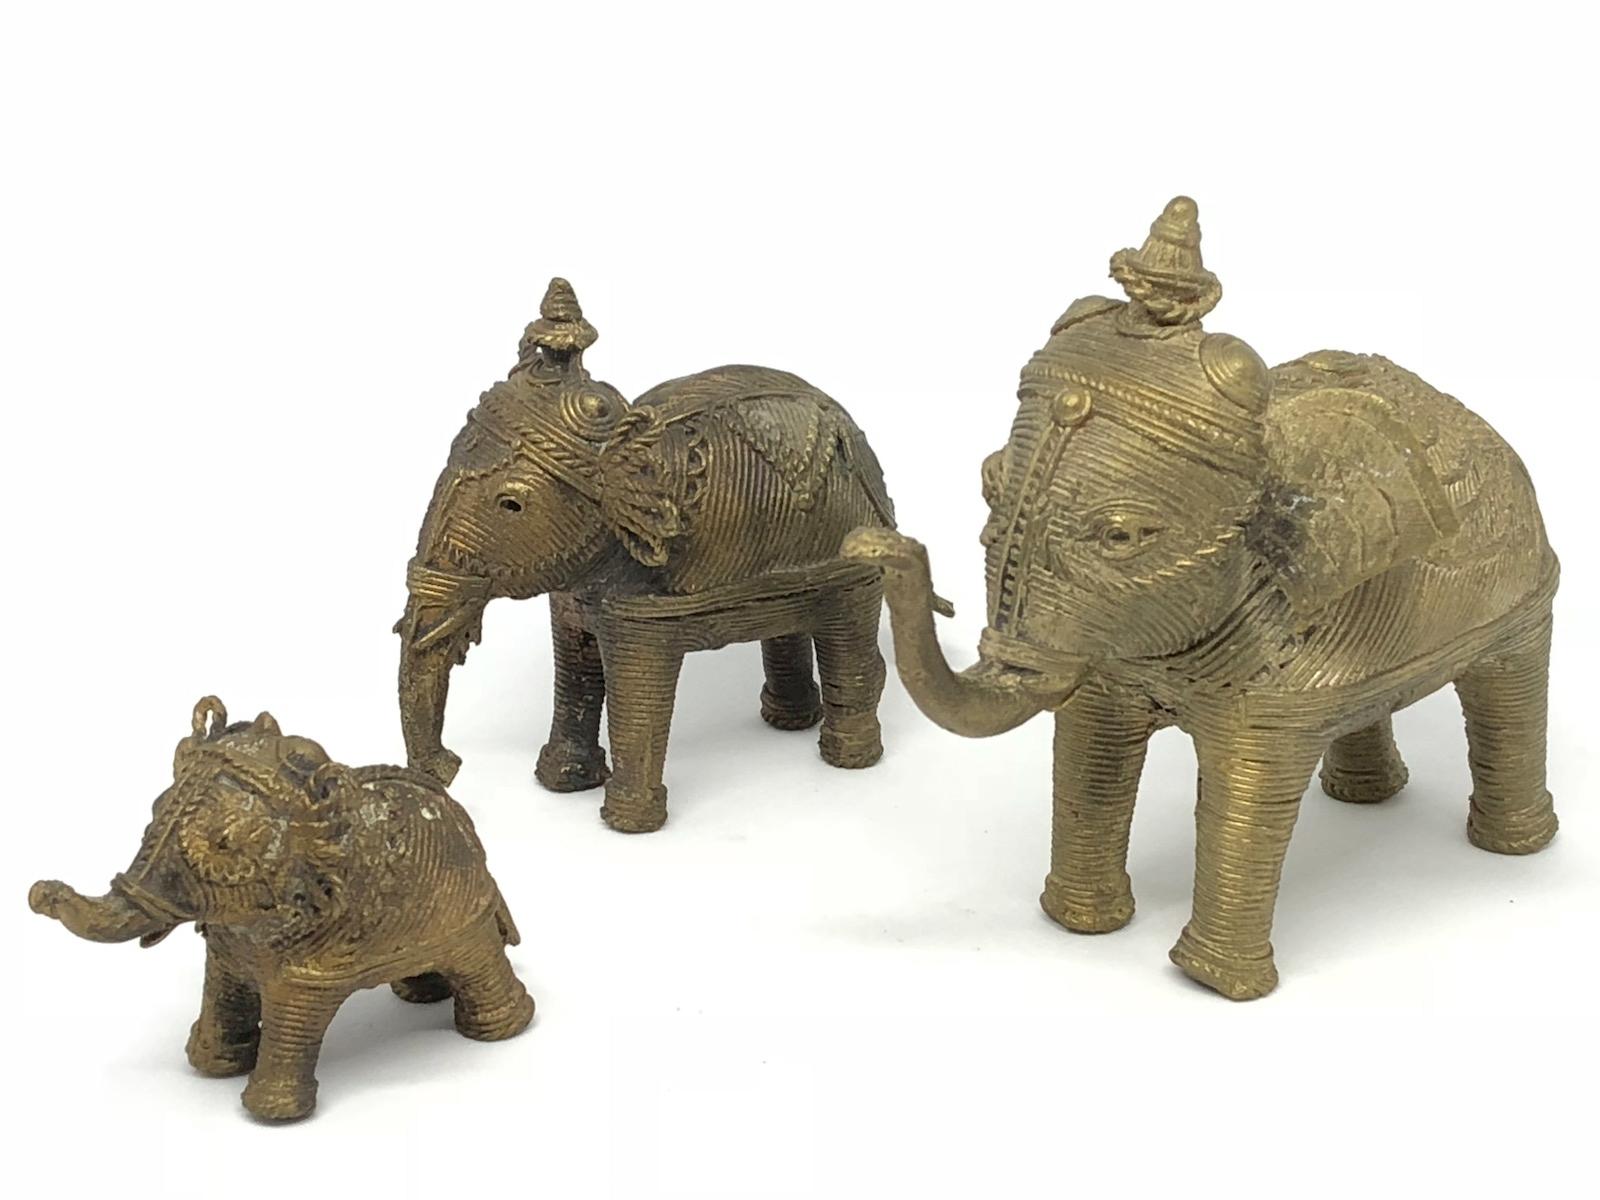 A decorative lot of three handmade elephant sculptures or statues. Some wear but this is old-age. Made of brass. We think it is from Asia and was made in the mid-20th century. Measures: Tallest is approximate 4 1/2